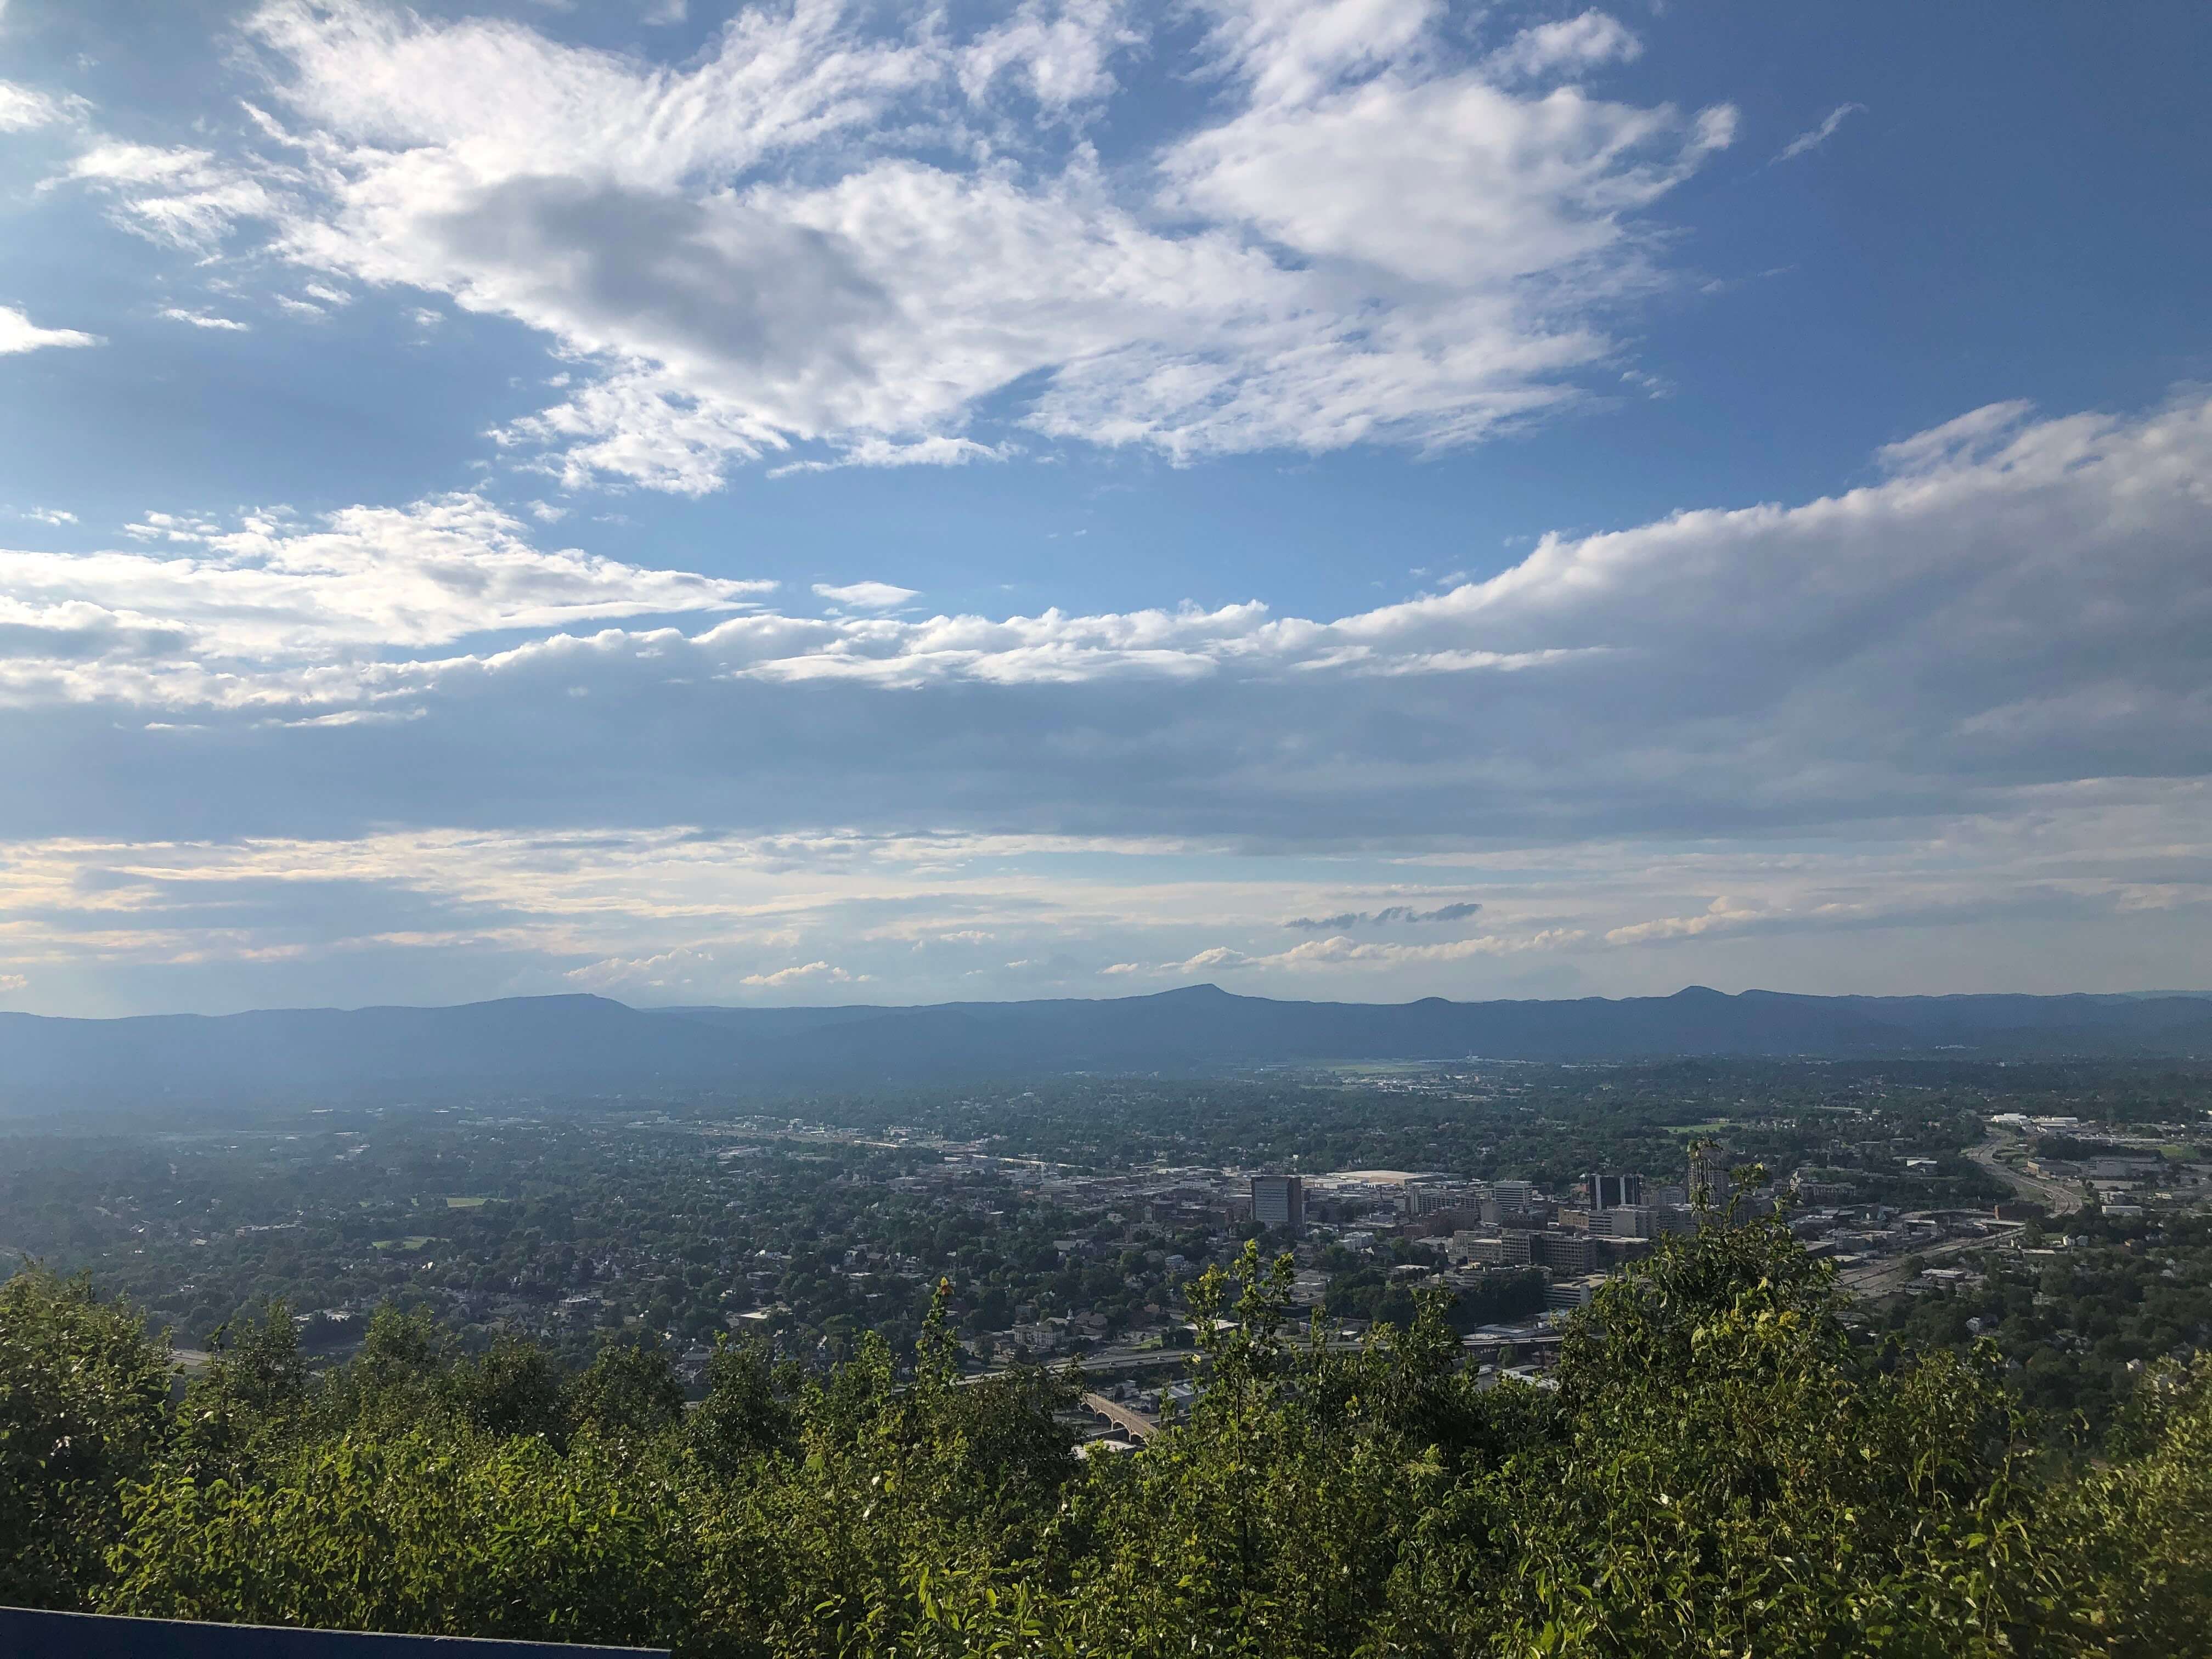 a view of the Roanoke Valley, city of Roanoke, and surrounding Blue Ridge Mountains from the Roanoke Star